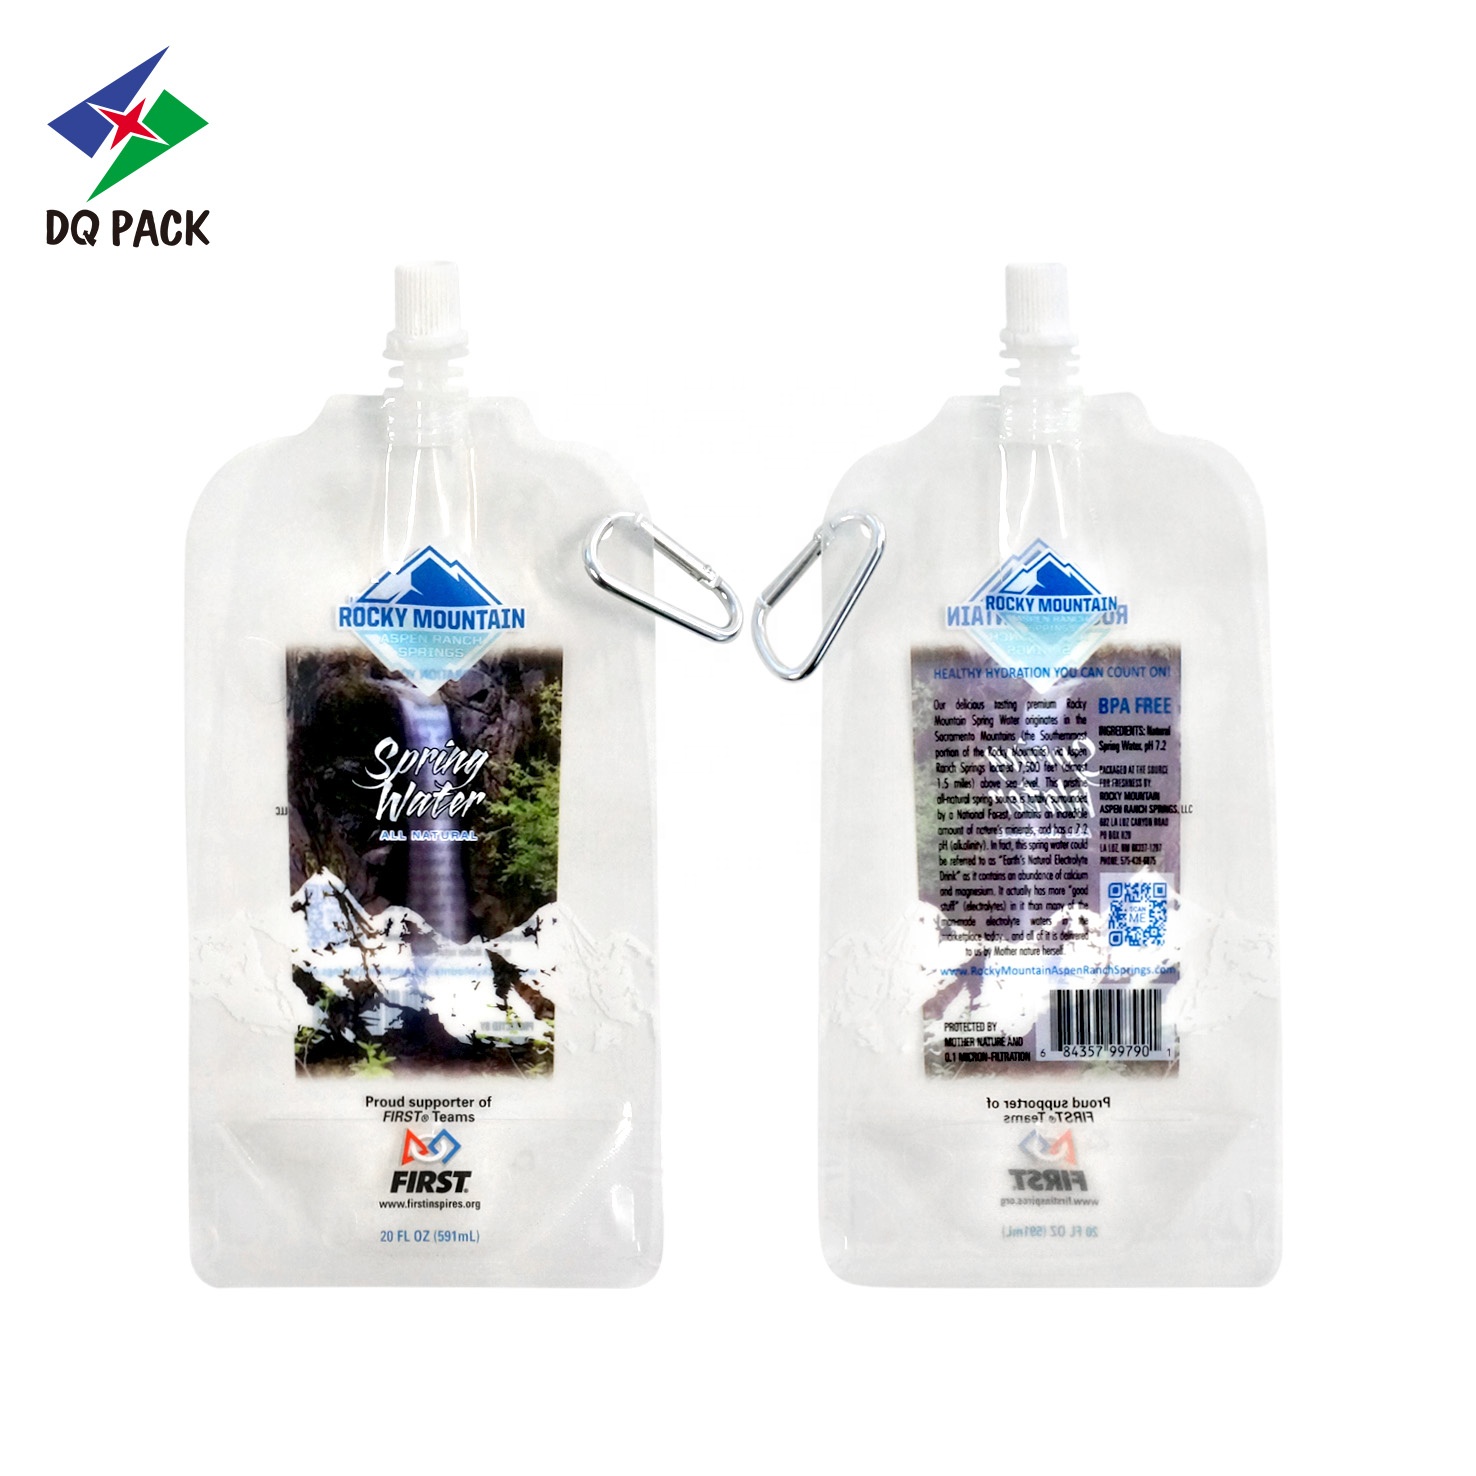 DQ PACK Custom pouch bags hits ahoy edibles 100ml Doypack Bag Stand Up Juice Water Packaging Plastic Bag Spout Pouch